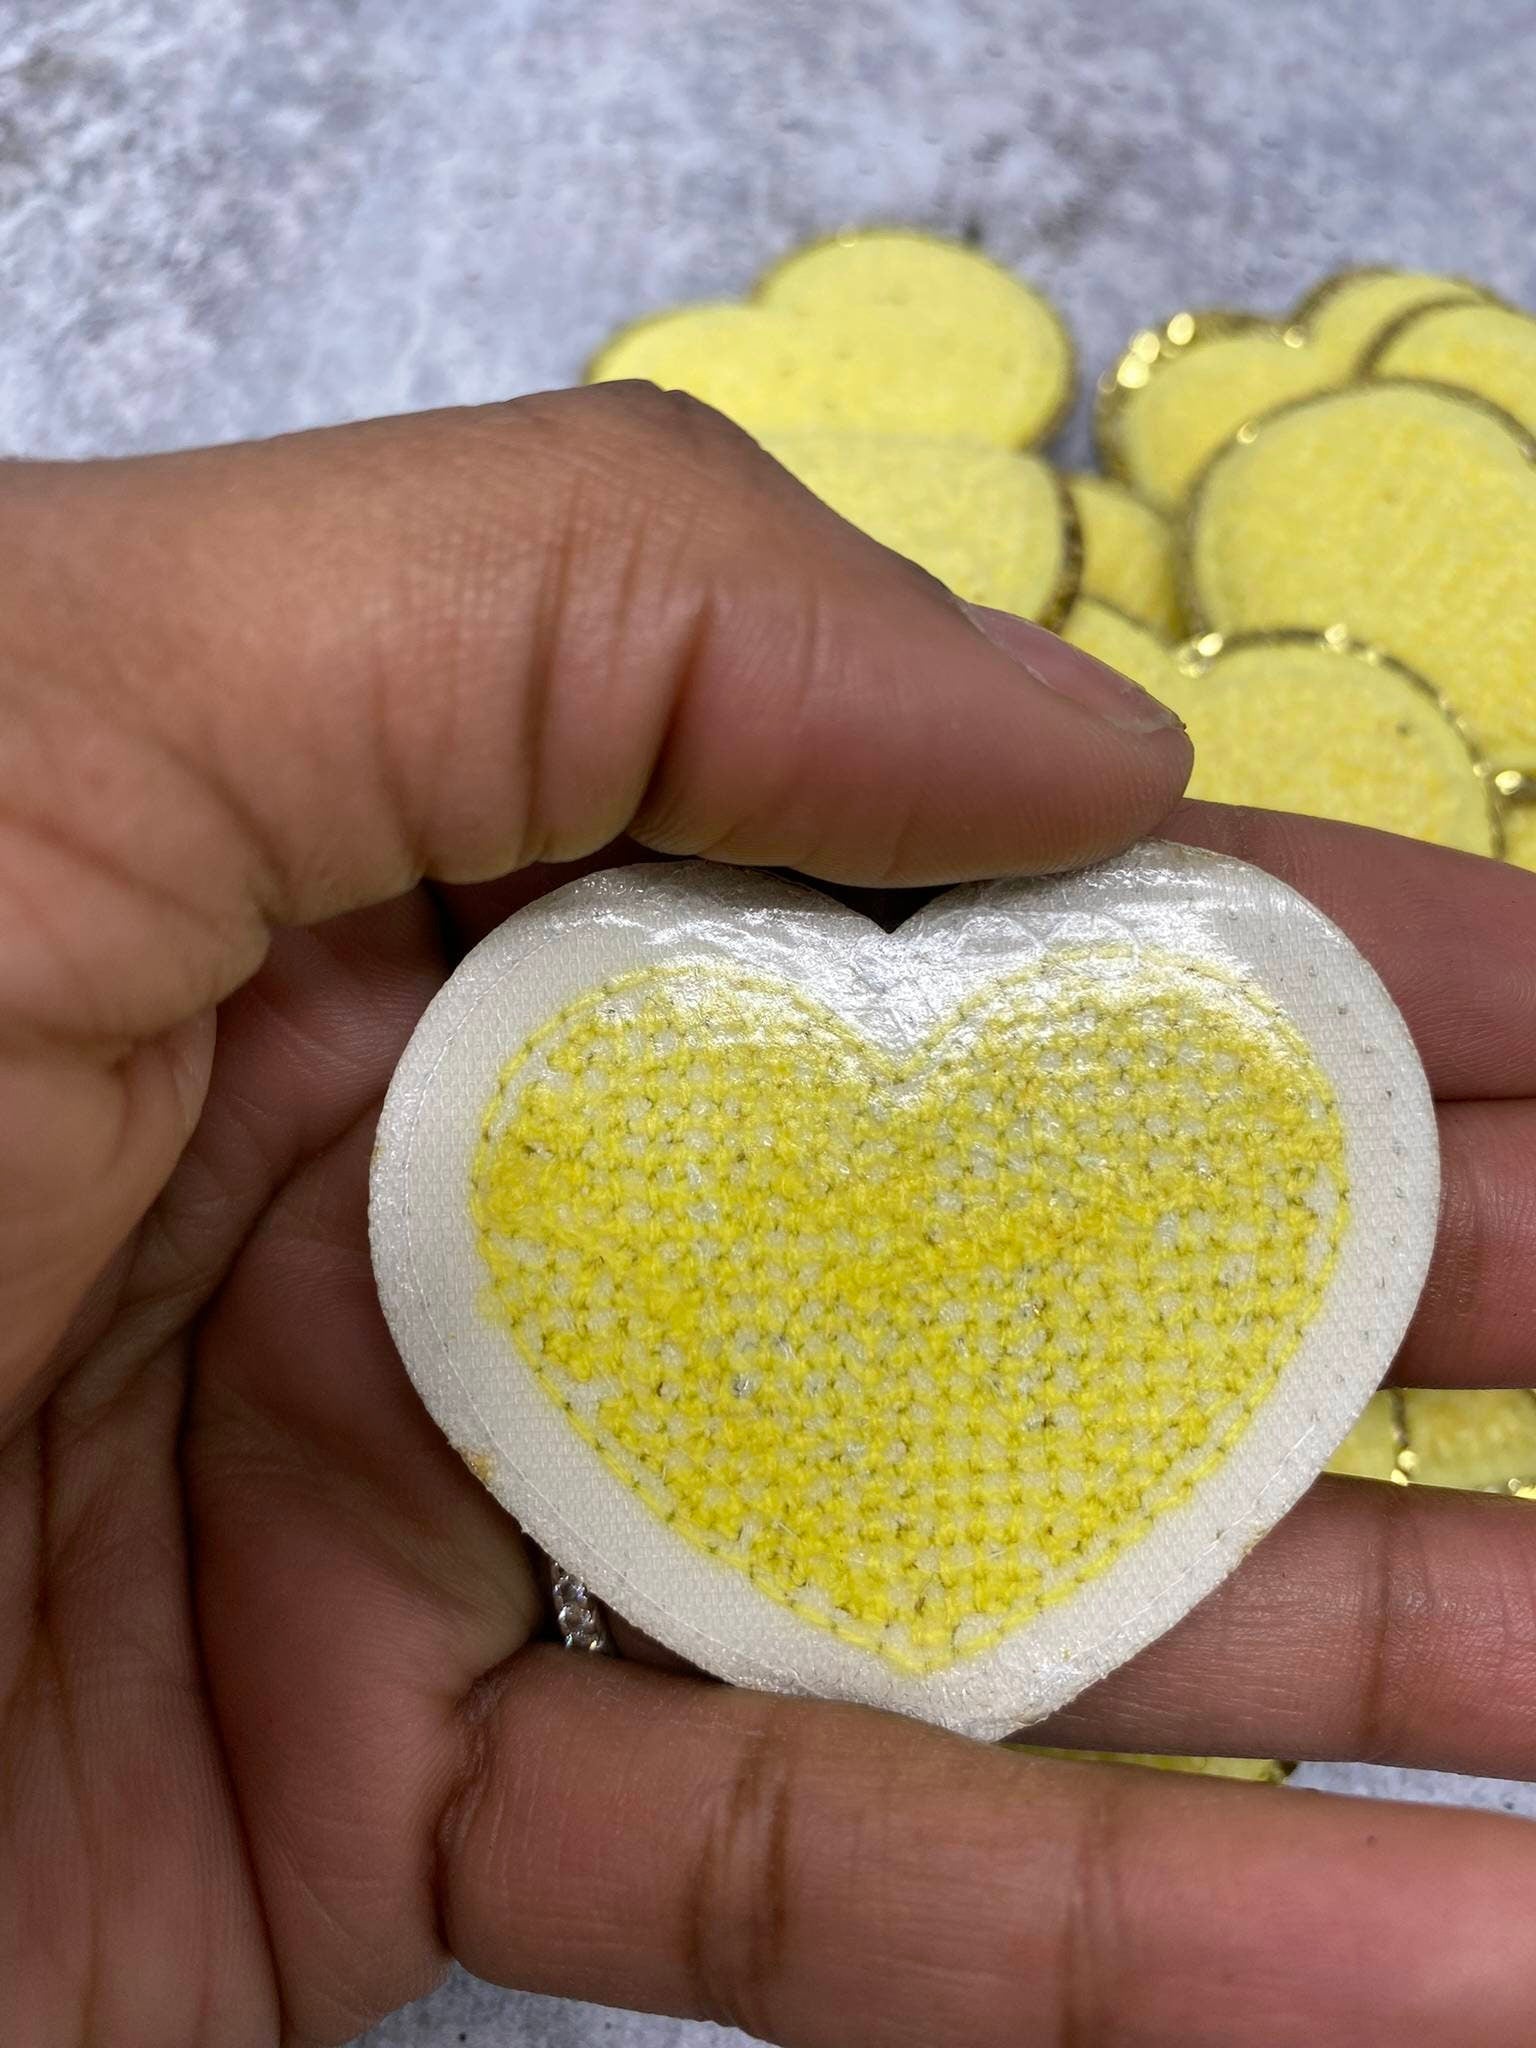 New: Yellow, 1-pc,Chenille "Heart" Patch w/ Gold Glitter, Size 2.5", Love Badge, Heart Patch with Iron-on Backing, Fuzzy Applique, DIY Patch